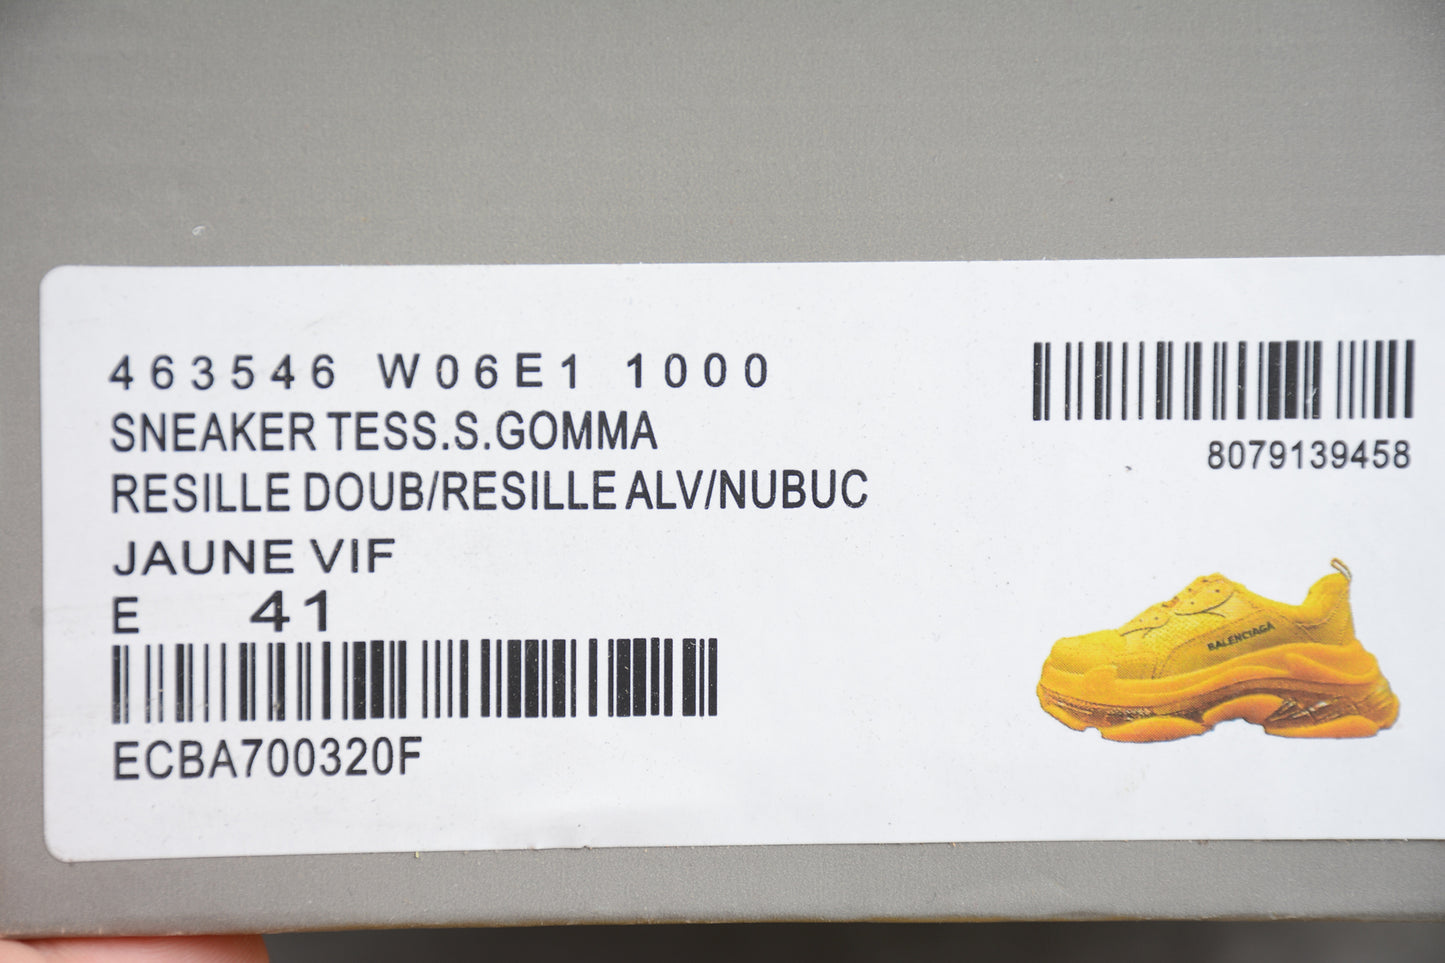 Triple s yellow clear sole - whatever on 